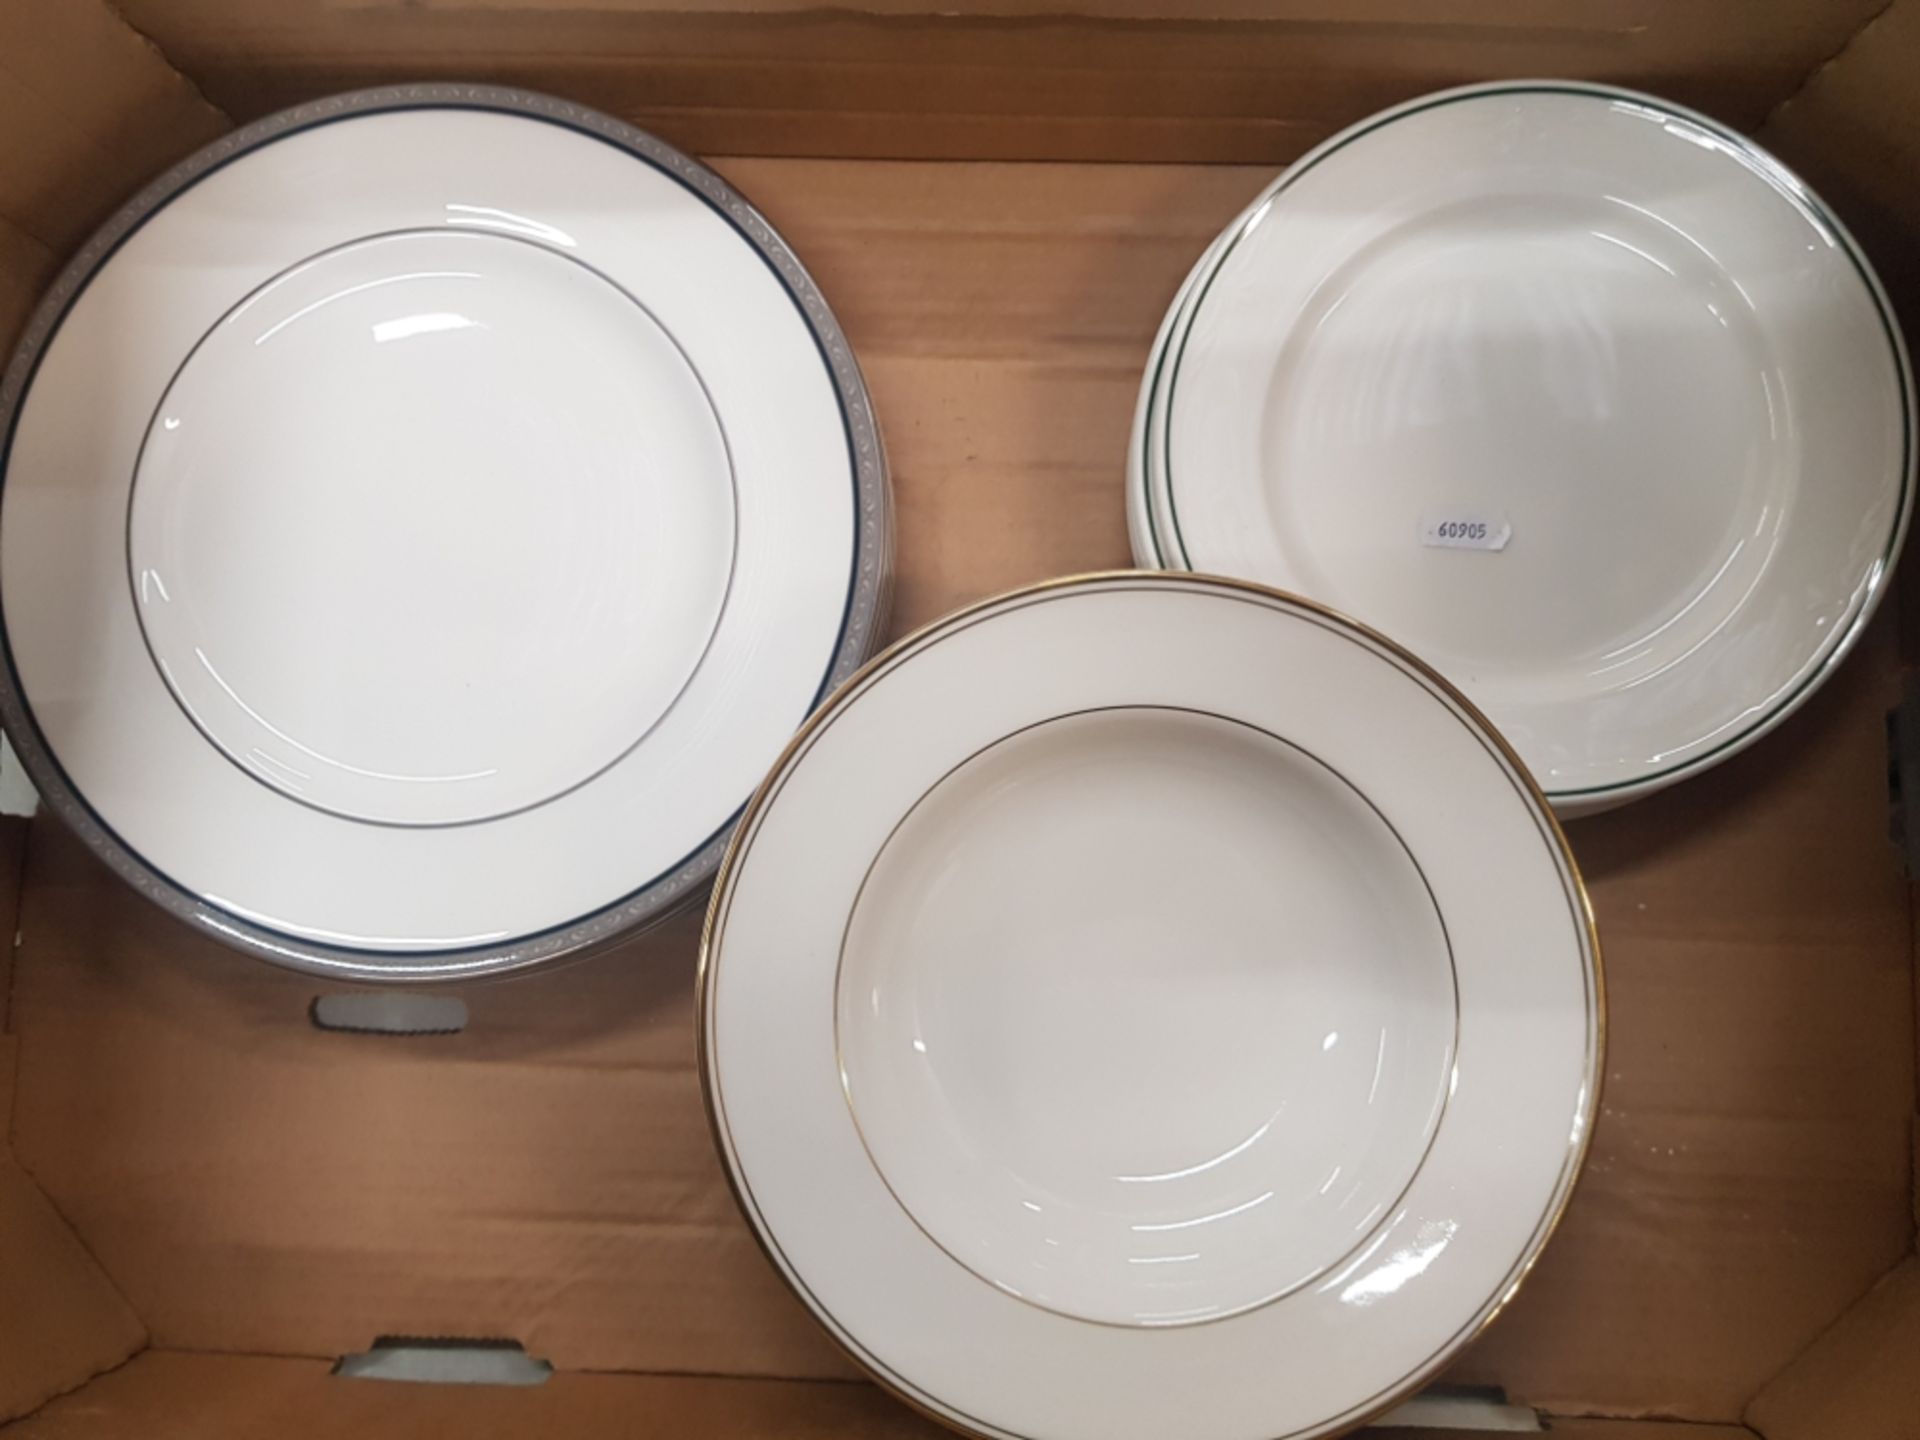 Royal Doulton dinnerware items to include 6 six legacy pattern dinner plates, 6 new romance